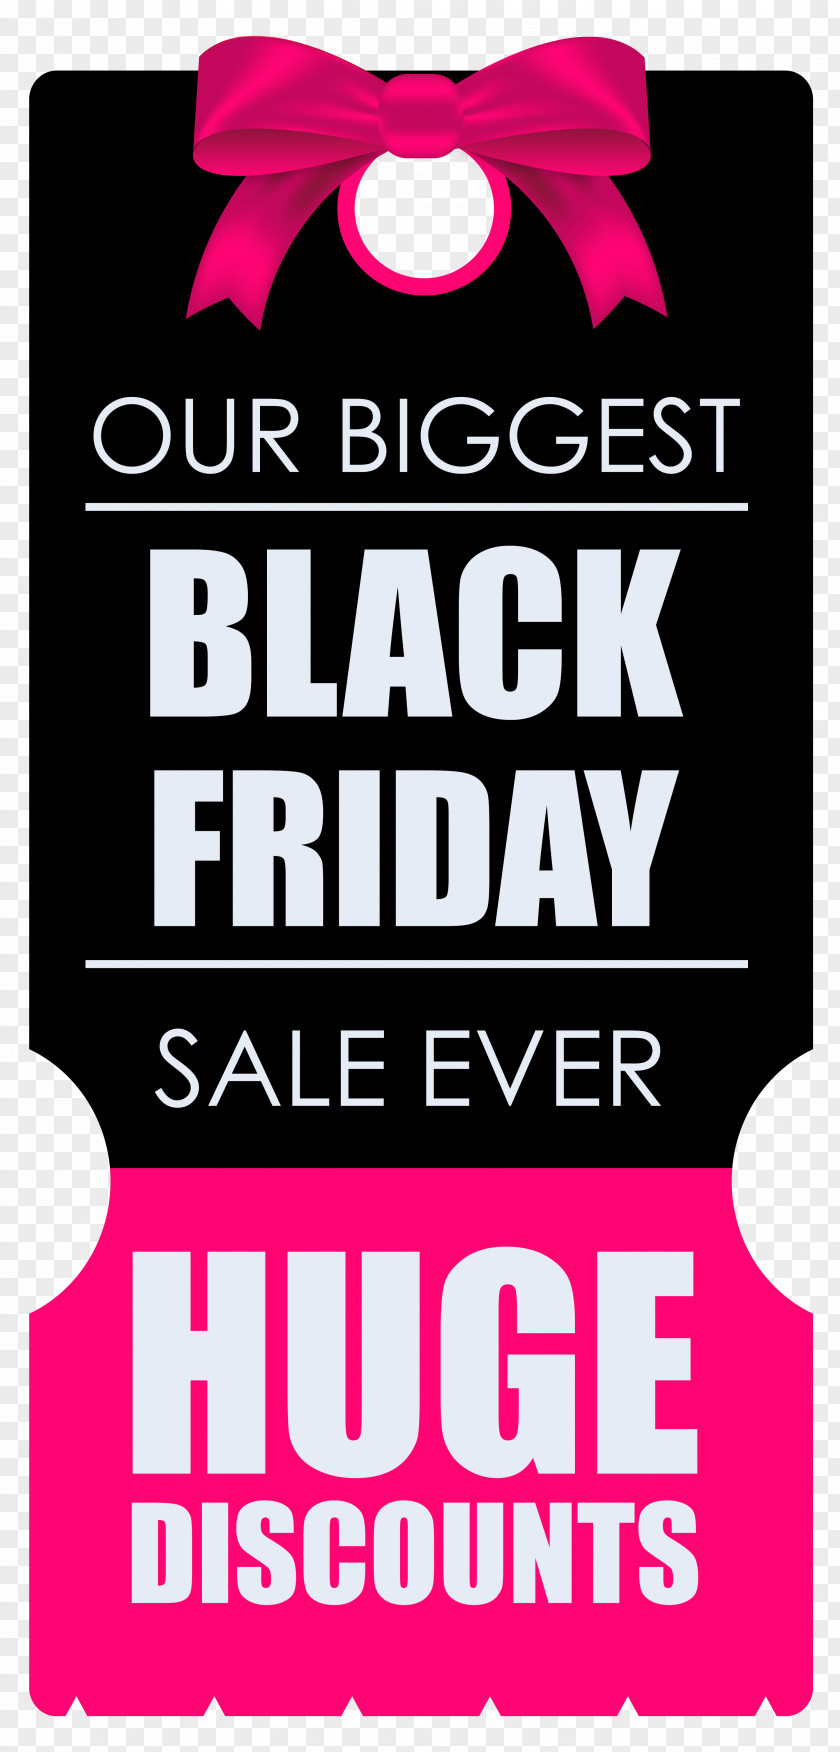 Black Friday Camera Discounts And Allowances PNG